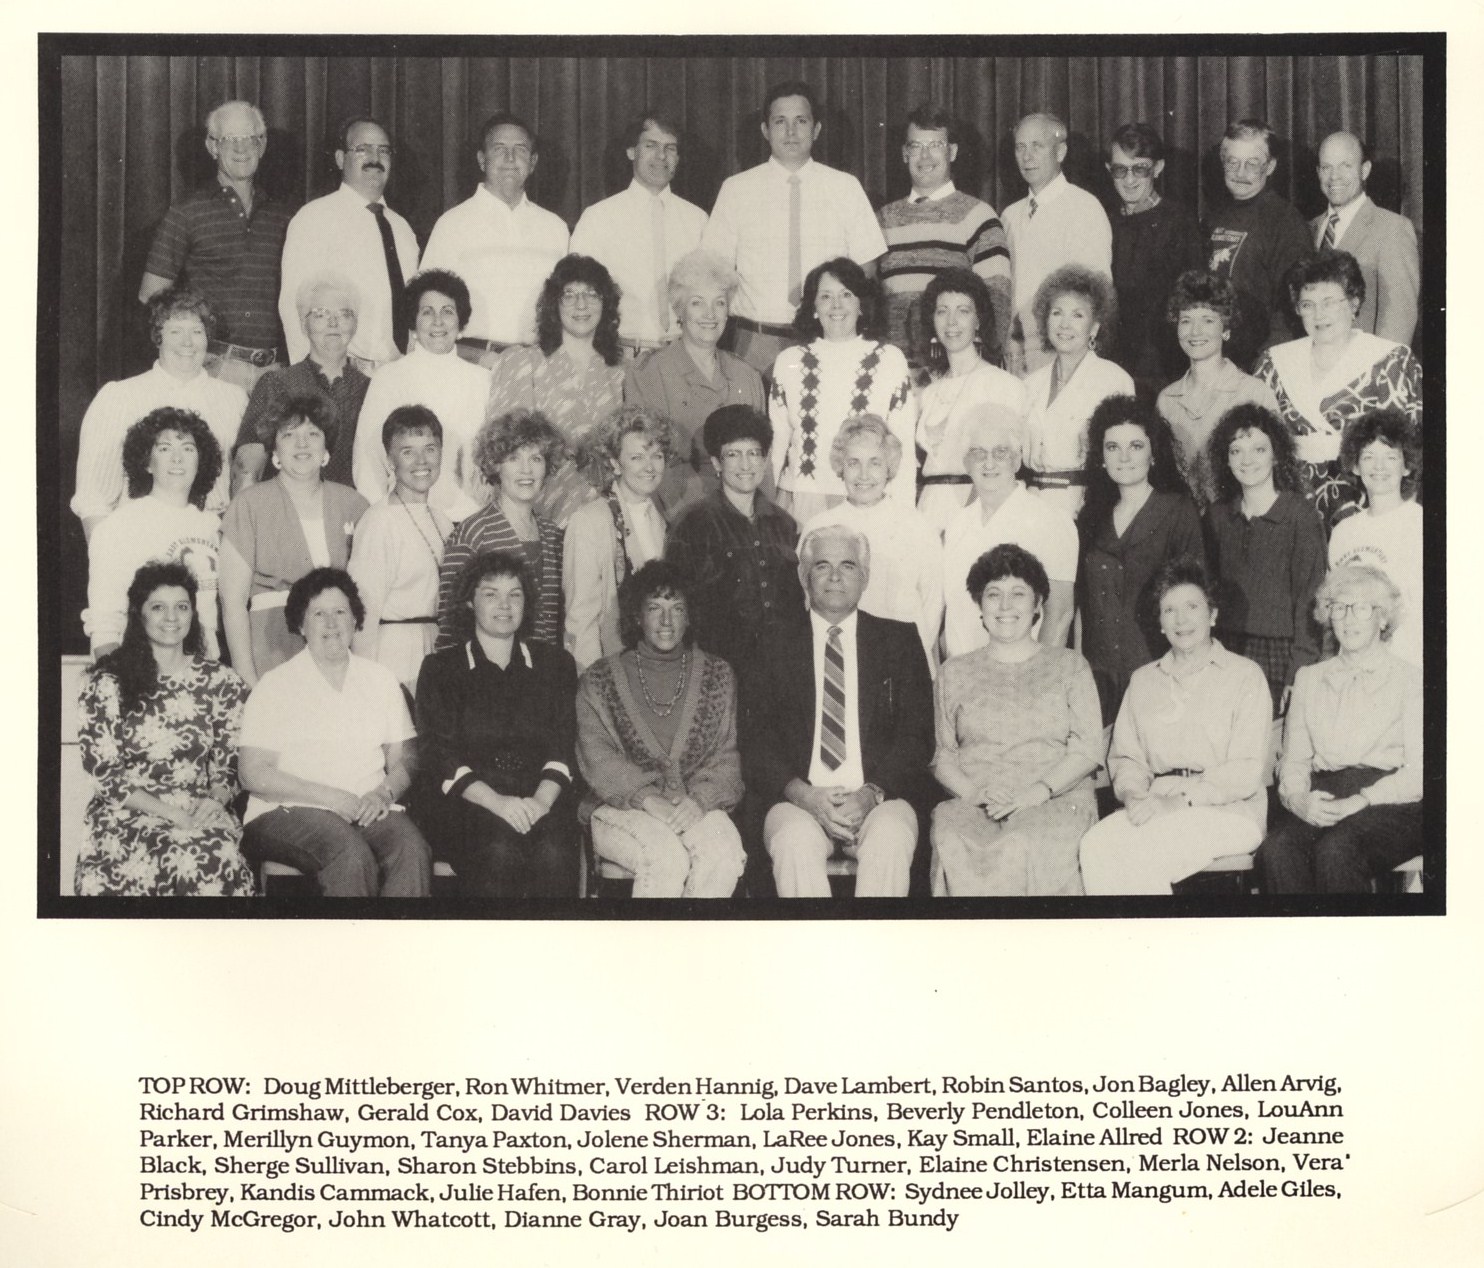 1990-1991 faculty & staff at East Elementary School